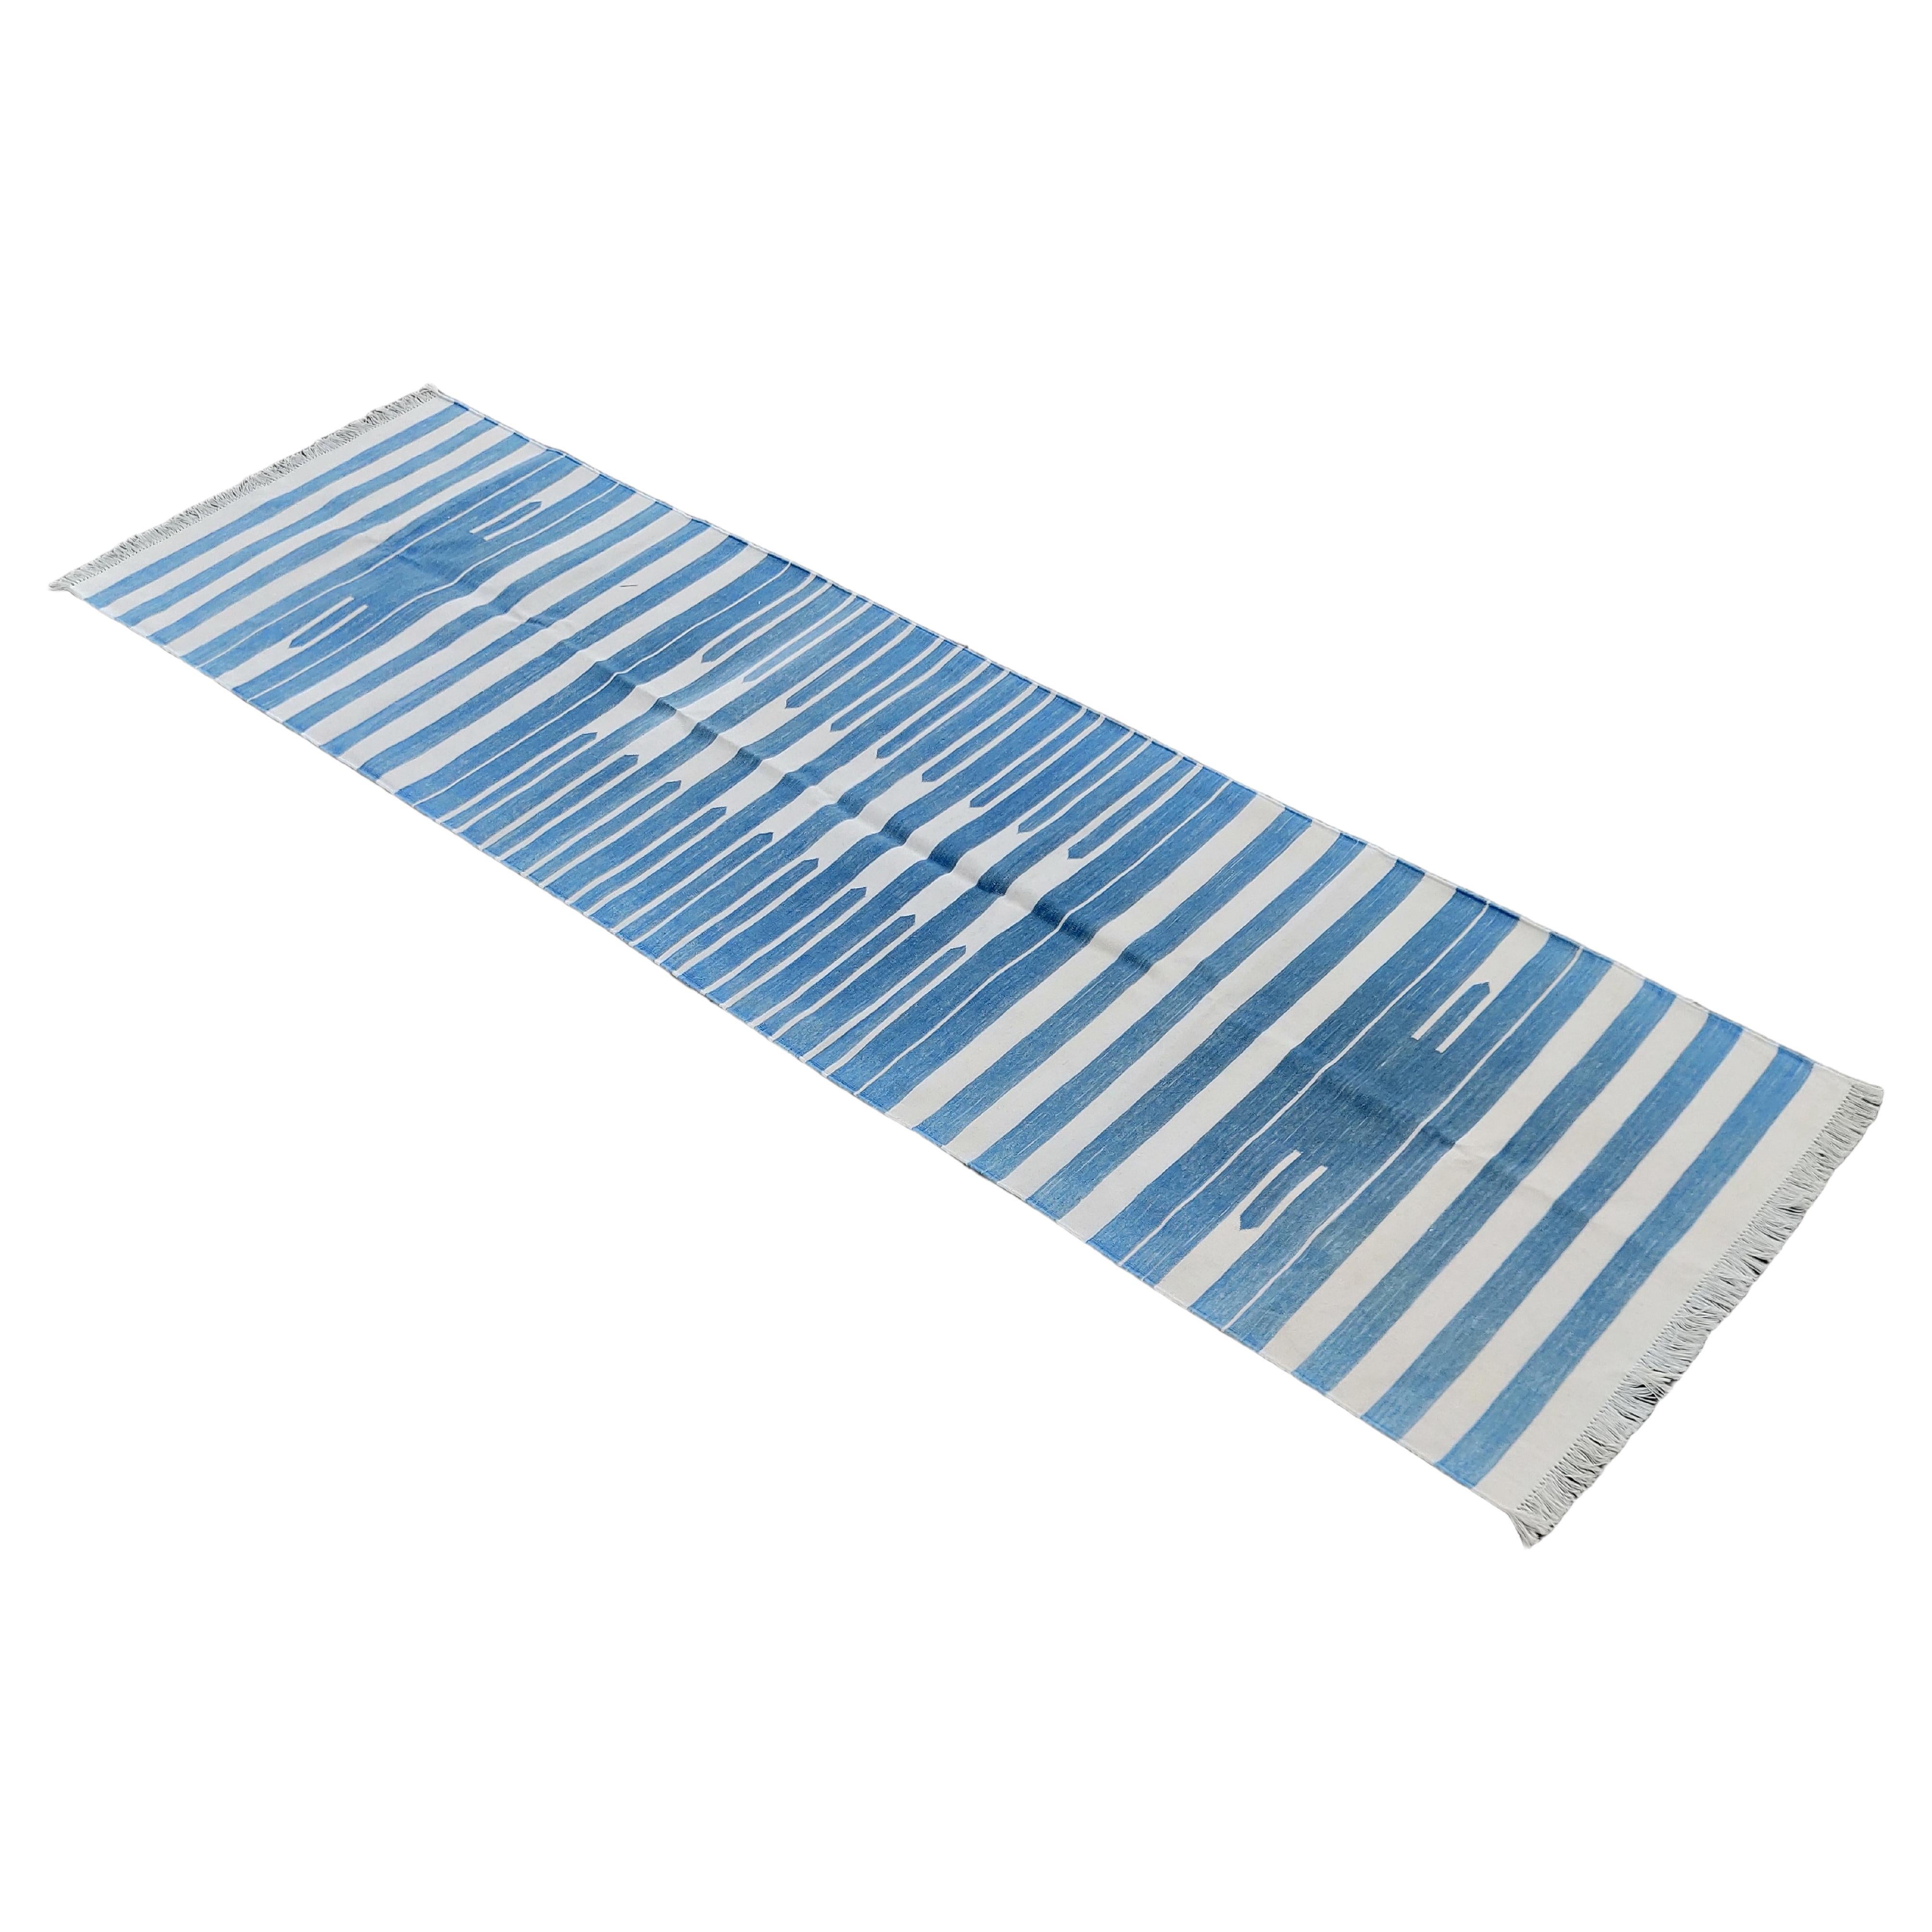 Handmade Cotton Area Flat Weave Runner, 3x10 Blue And White Striped Dhurrie Rug For Sale